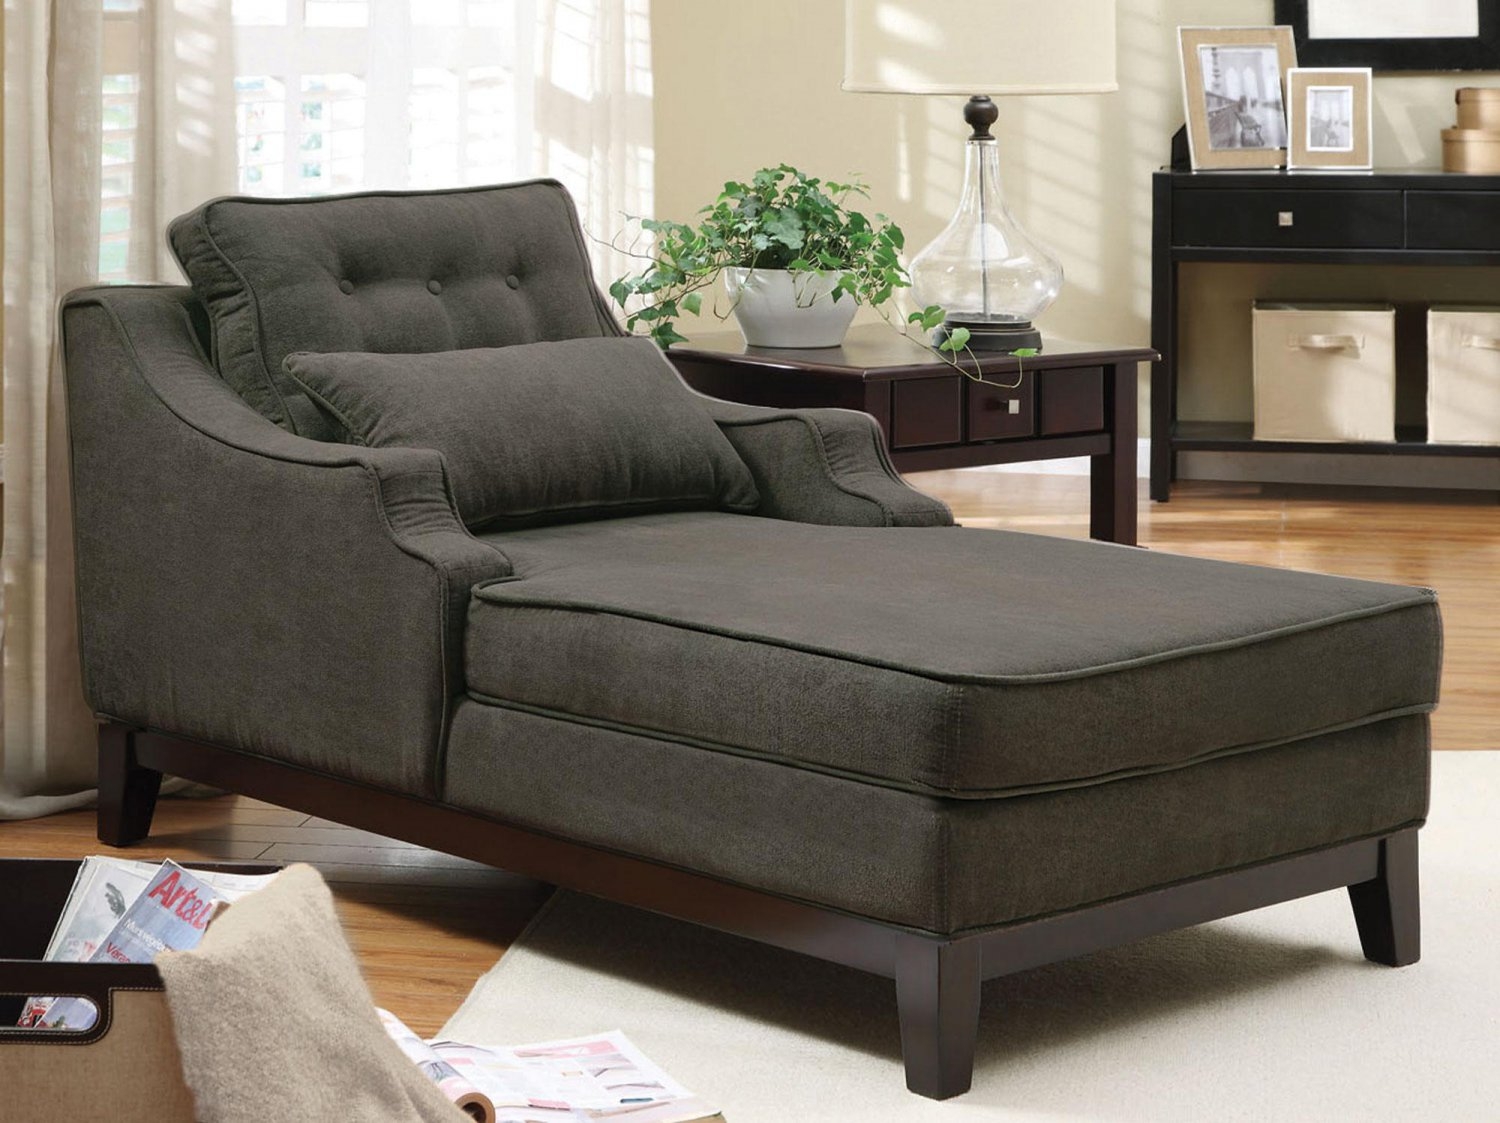 Gray chaise lounge 4